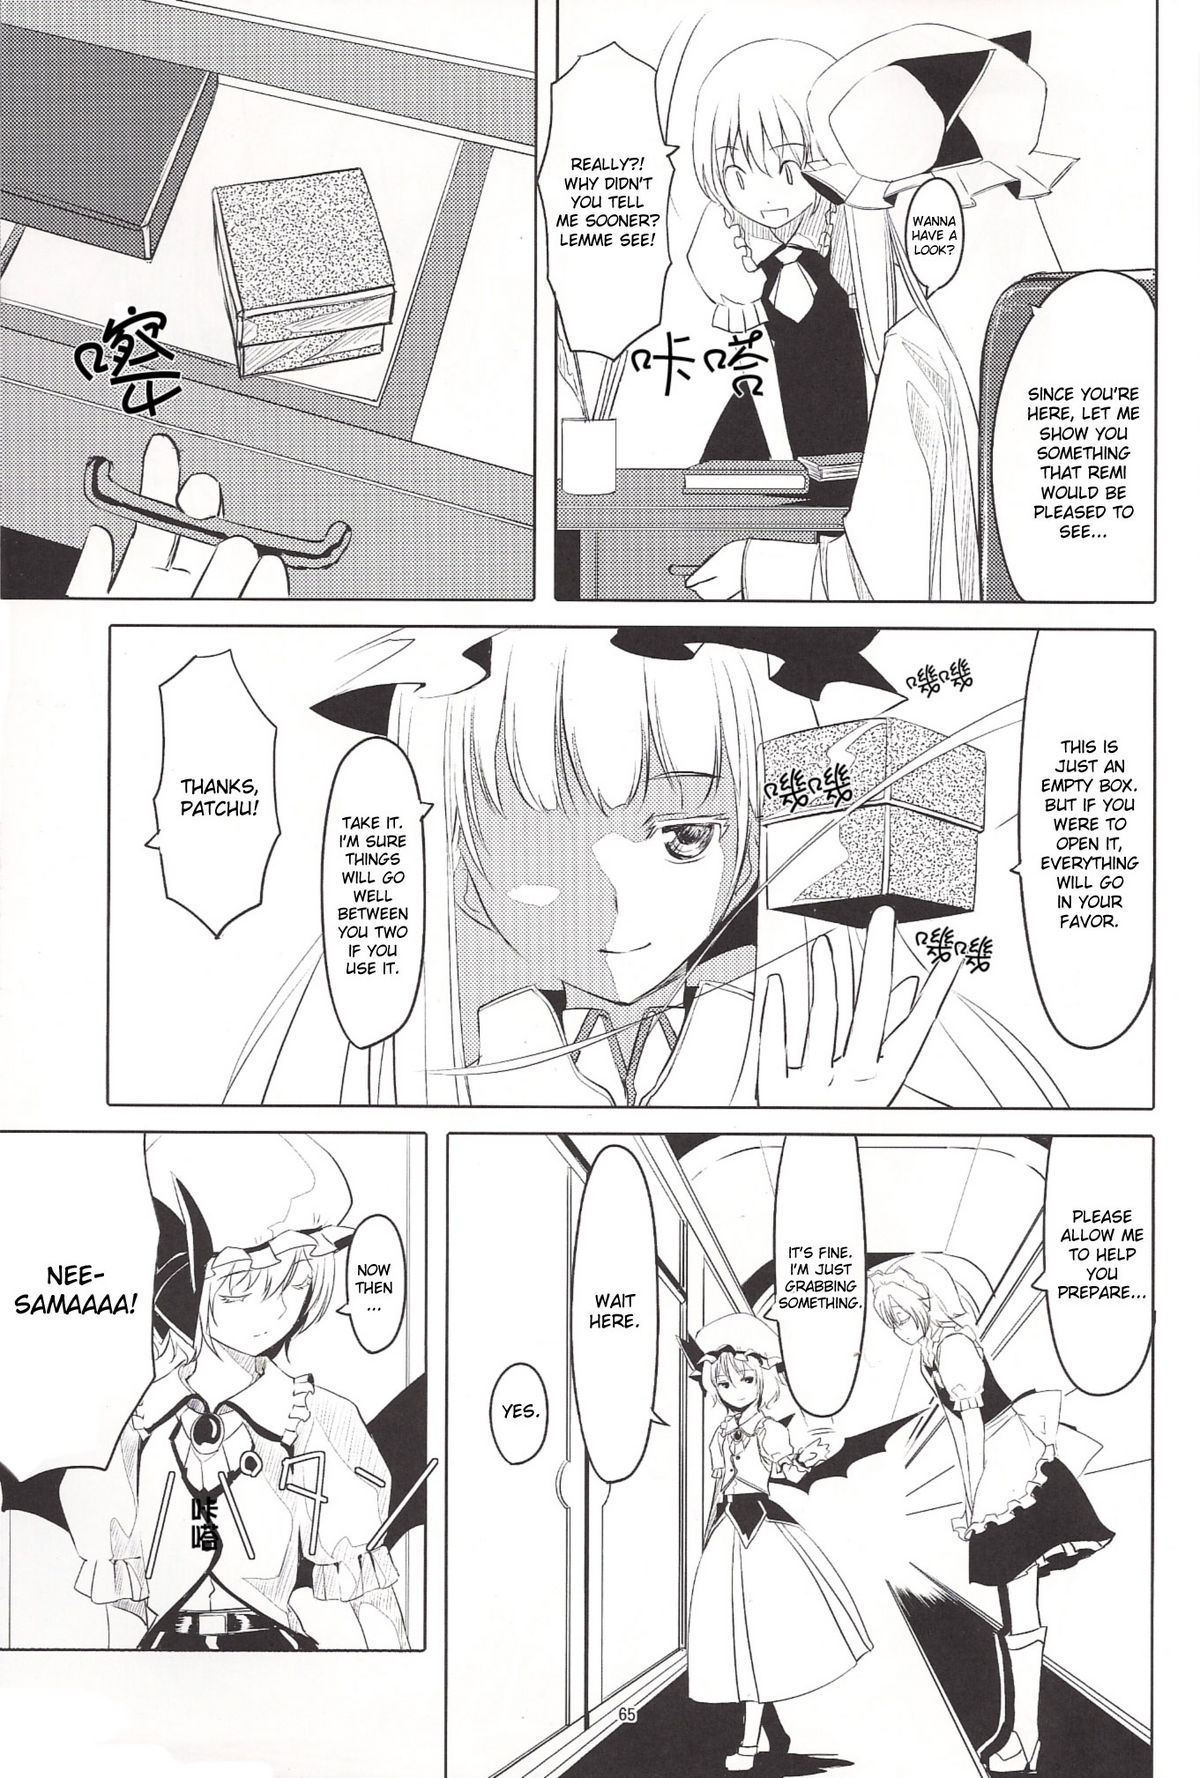 [telomereNA (Gustav)] S-2:Scarlet Sisters (Touhou Project) [English] [desudesu] [Incomplete] page 4 full